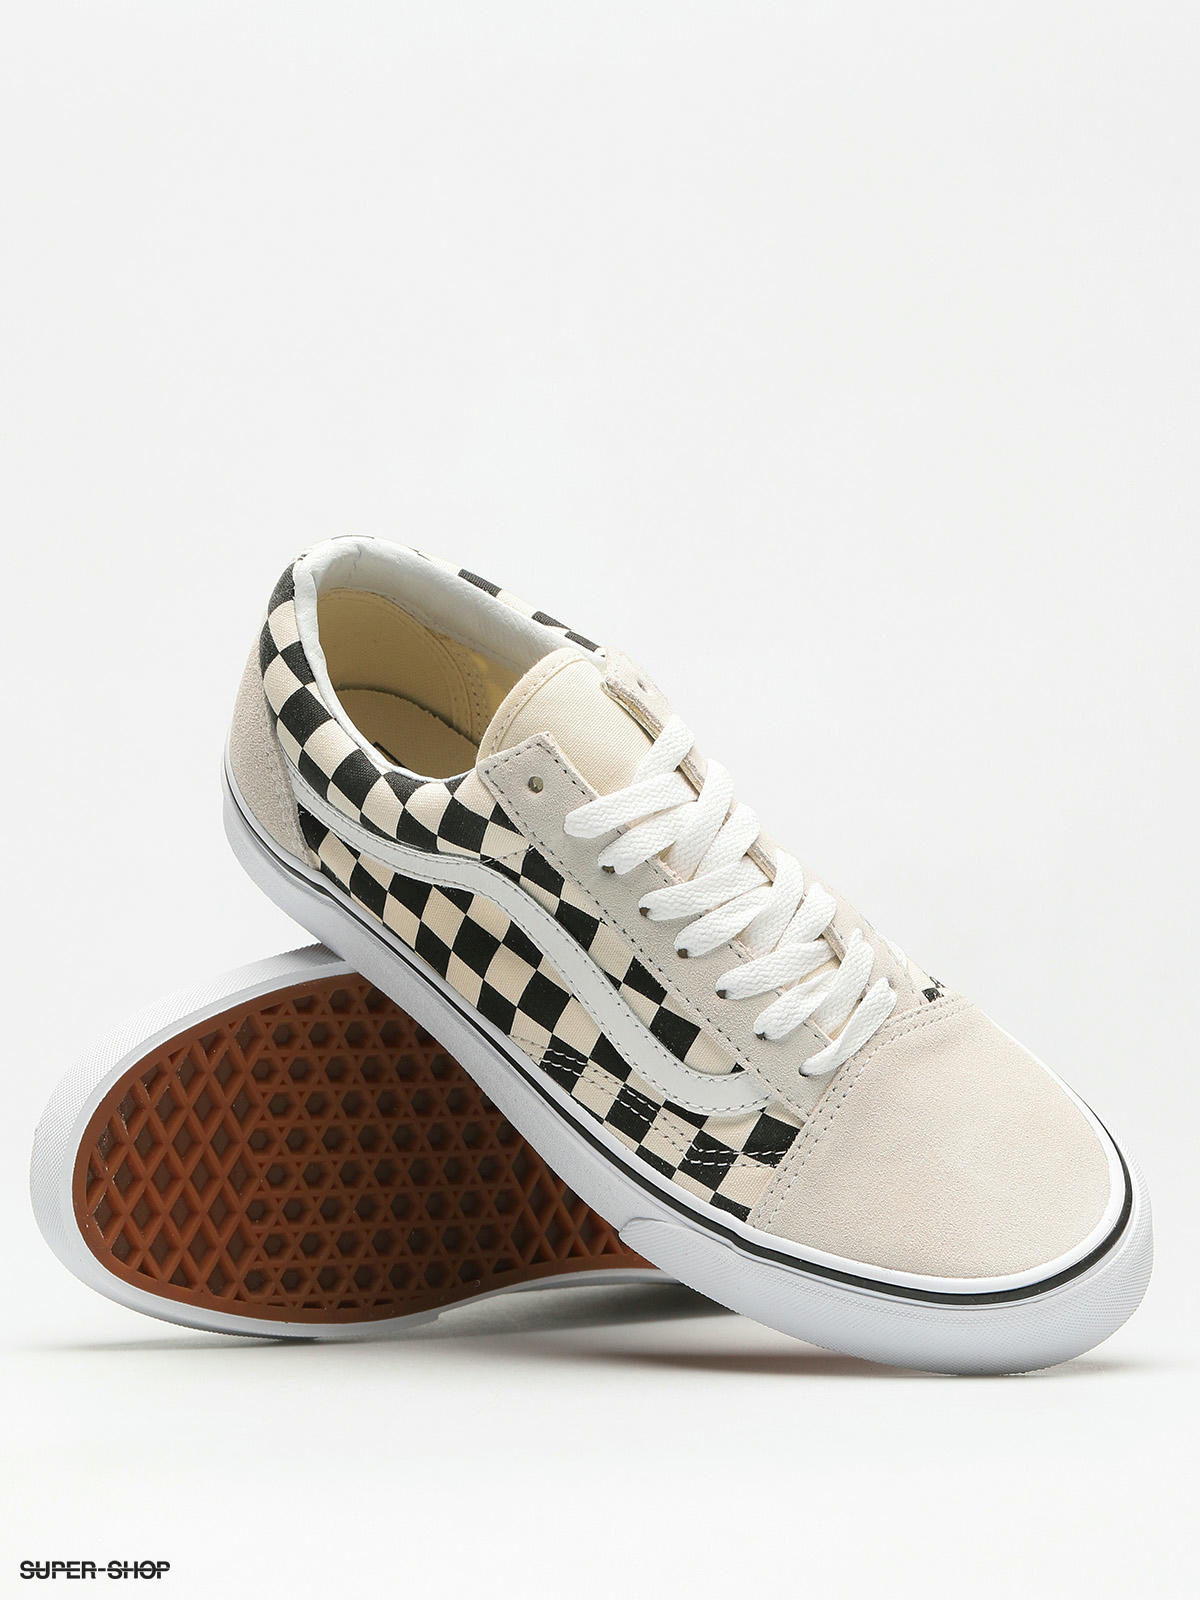 vans tan and white checkered